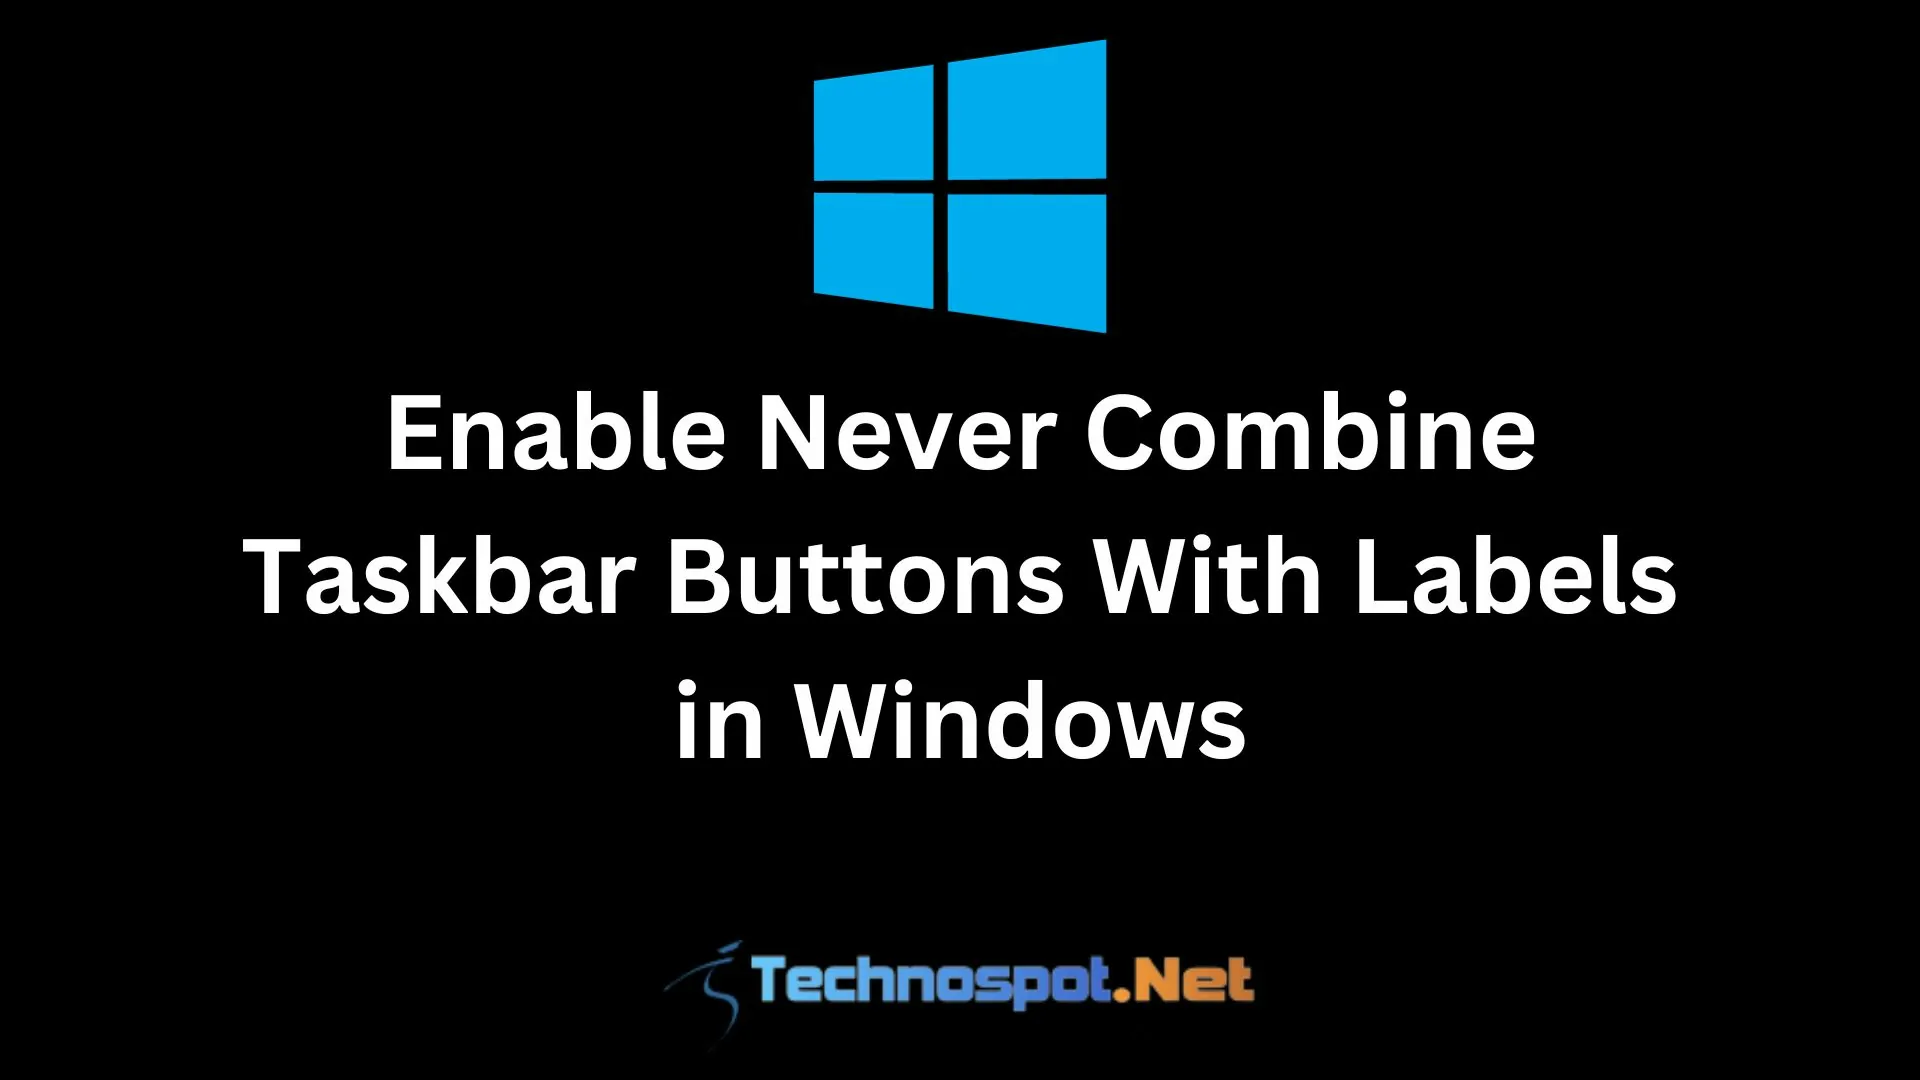 Enable Never Combine Taskbar Buttons With Labels in Windows